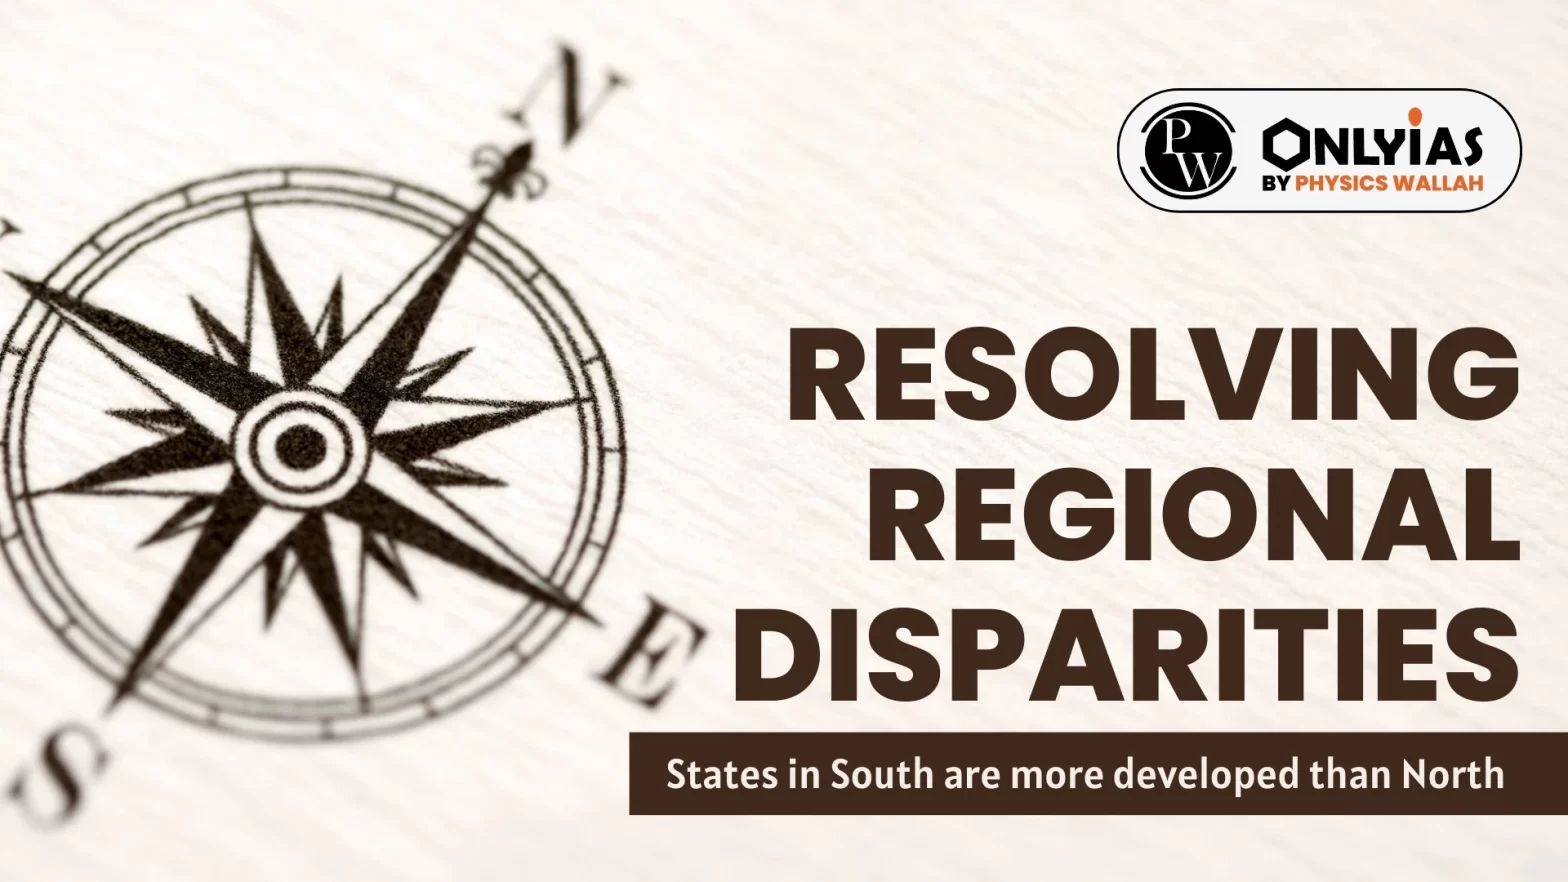 Resolving Regional Disparities: States in South are more developed than North